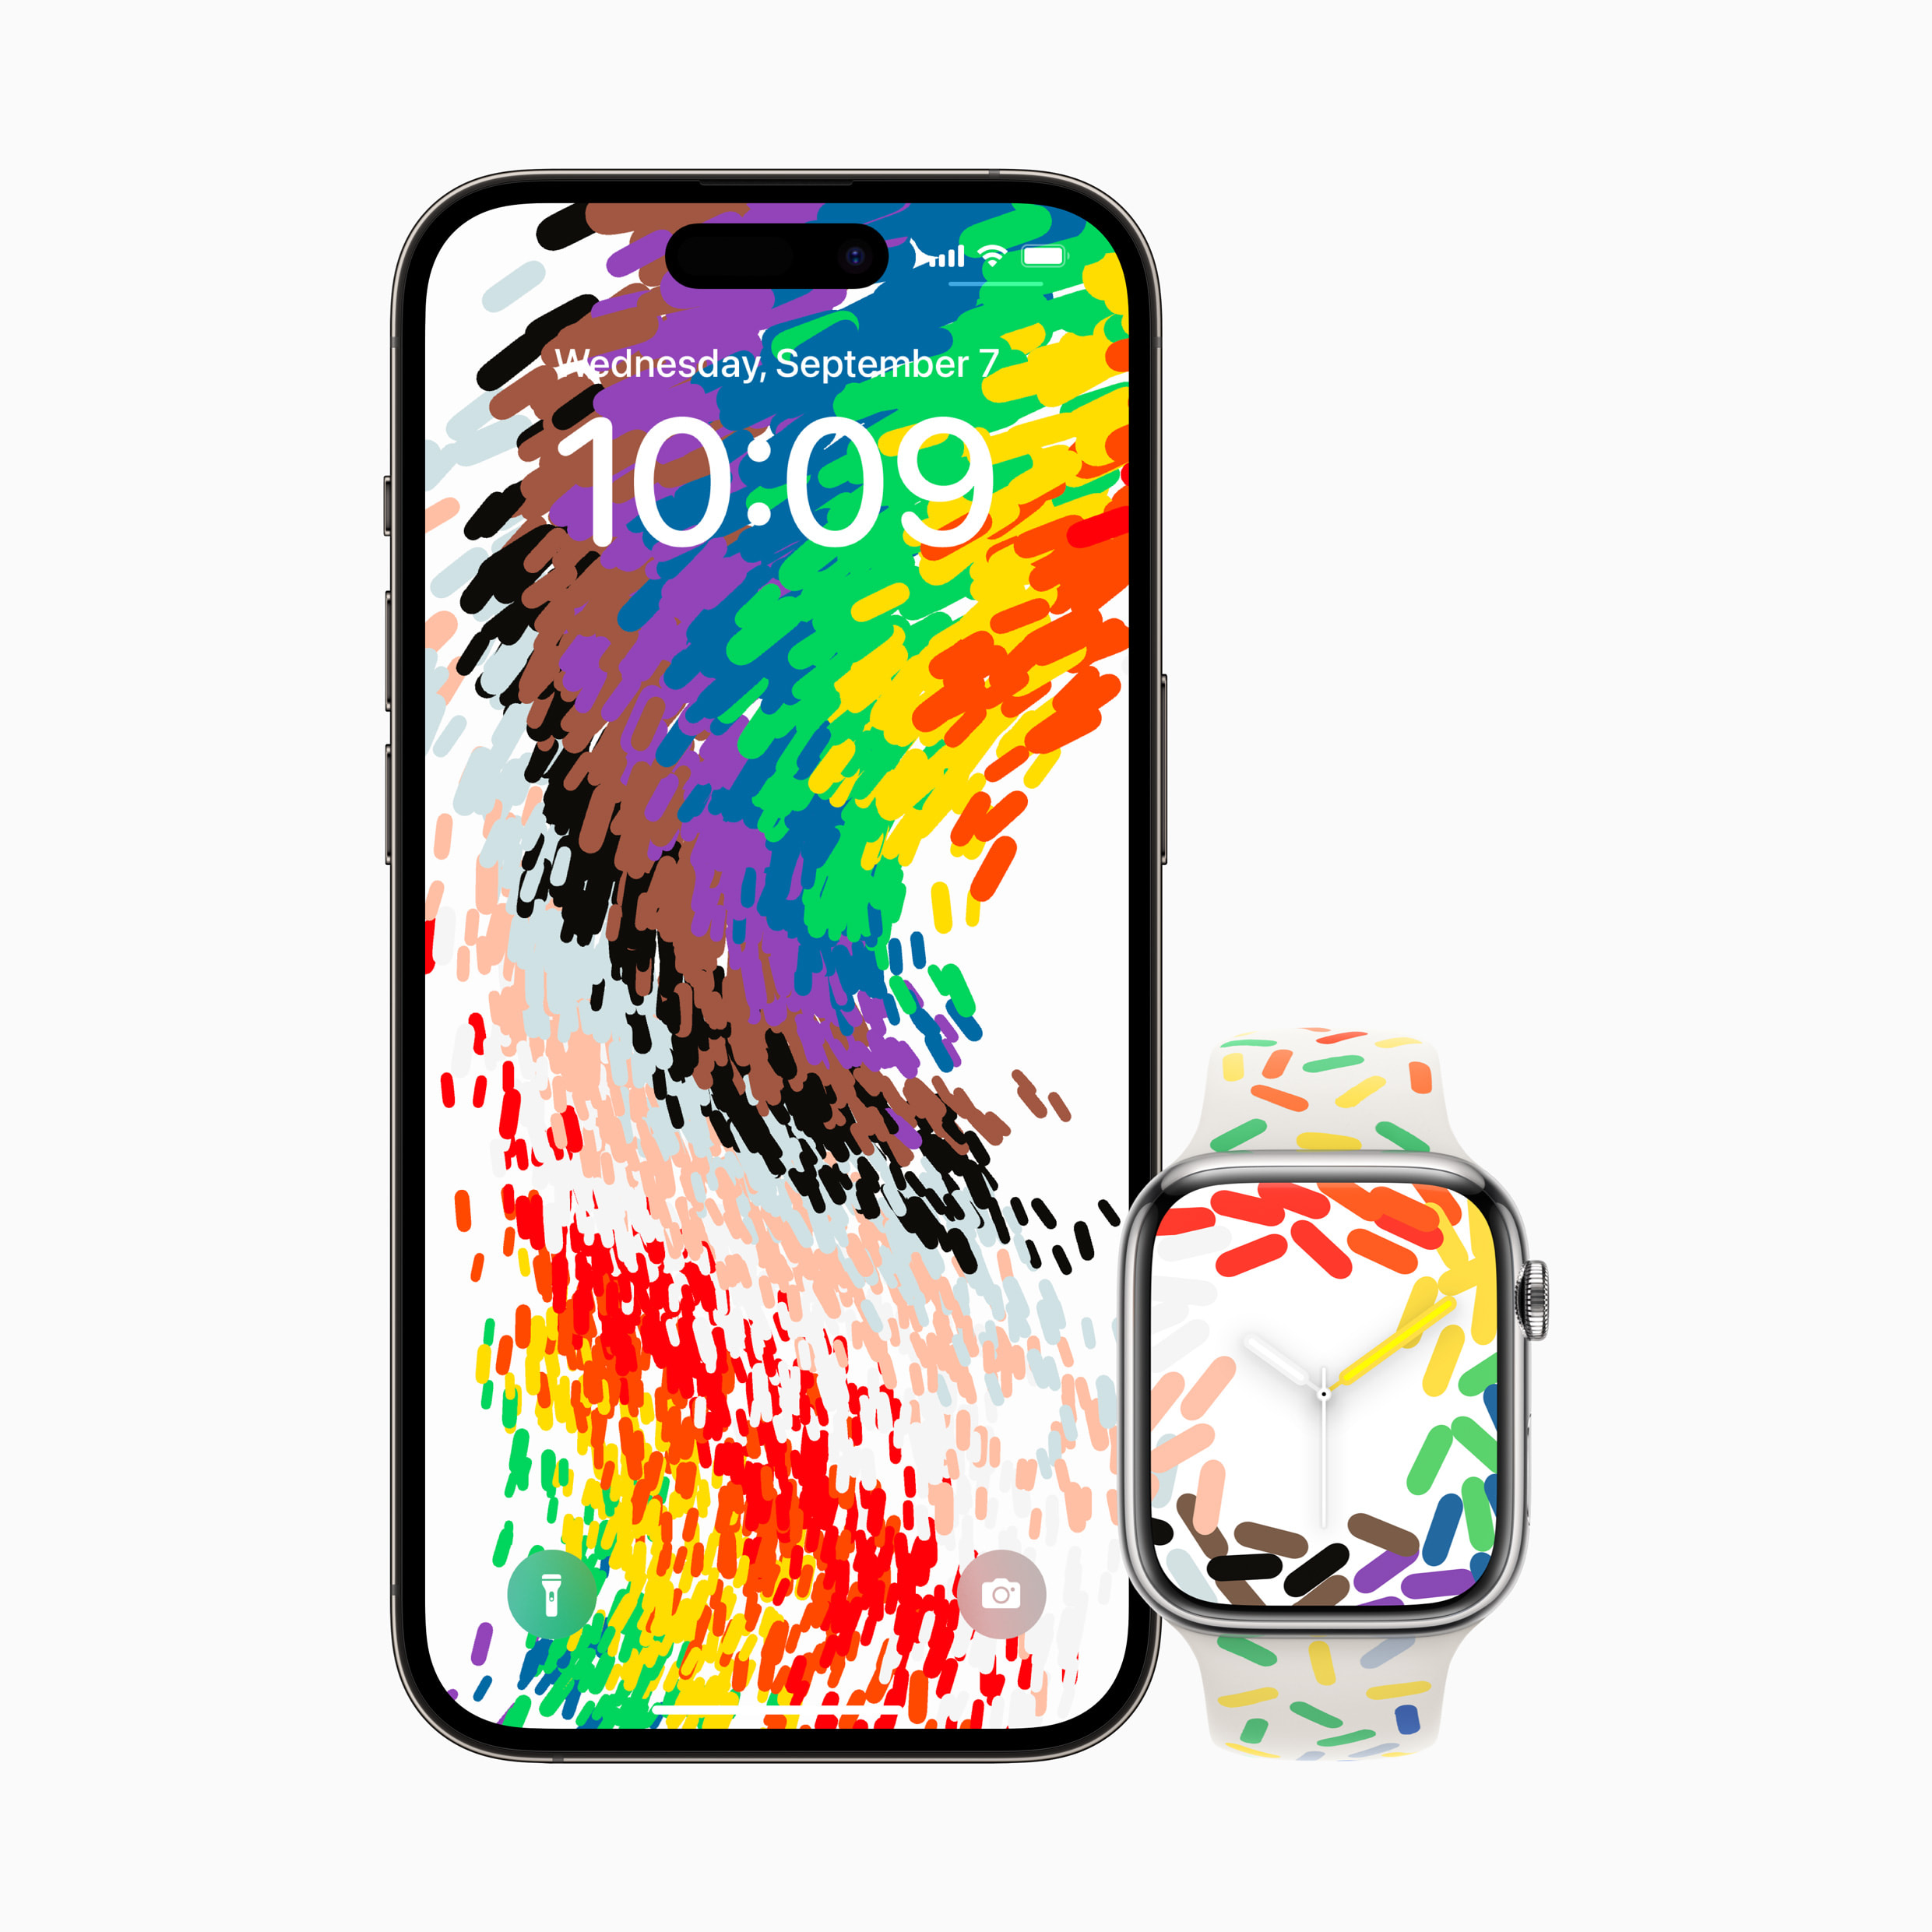 How do i get the pride celebration wallpaper on iphoneTikTok Search